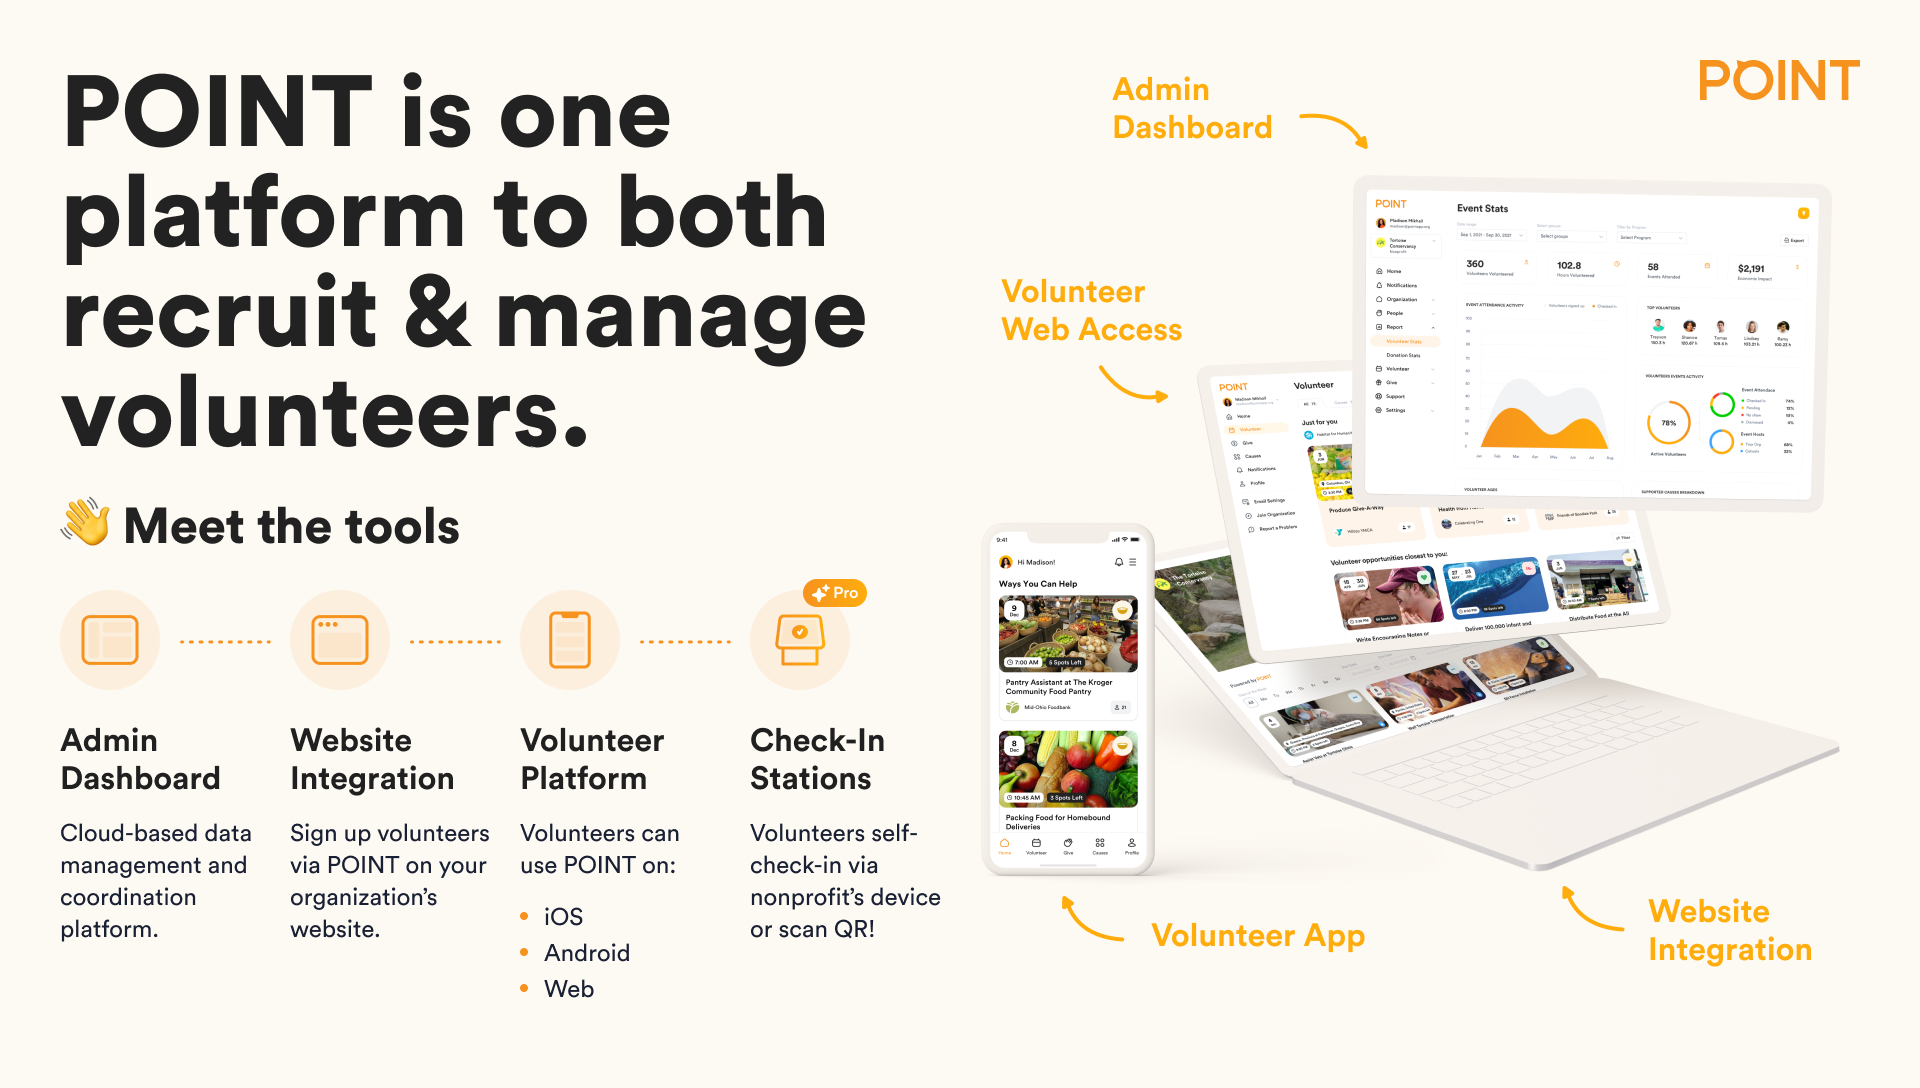 POINT is one platform to both recruit & manage volunteers.